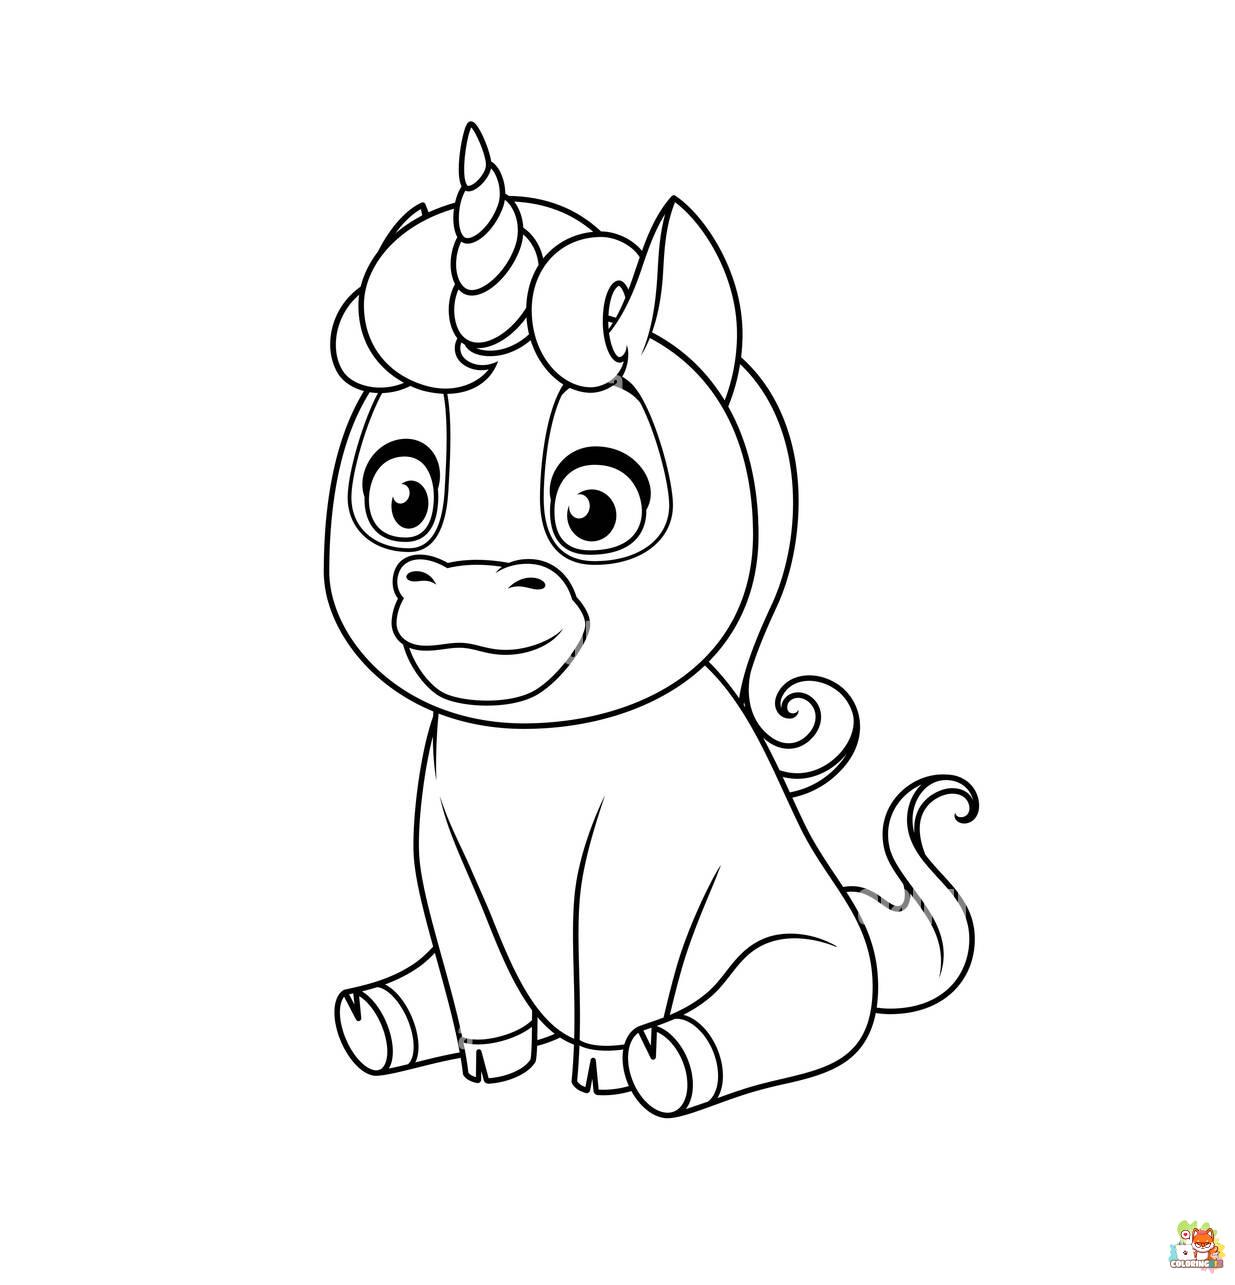 Unicorn Sitting Coloring Pages 6